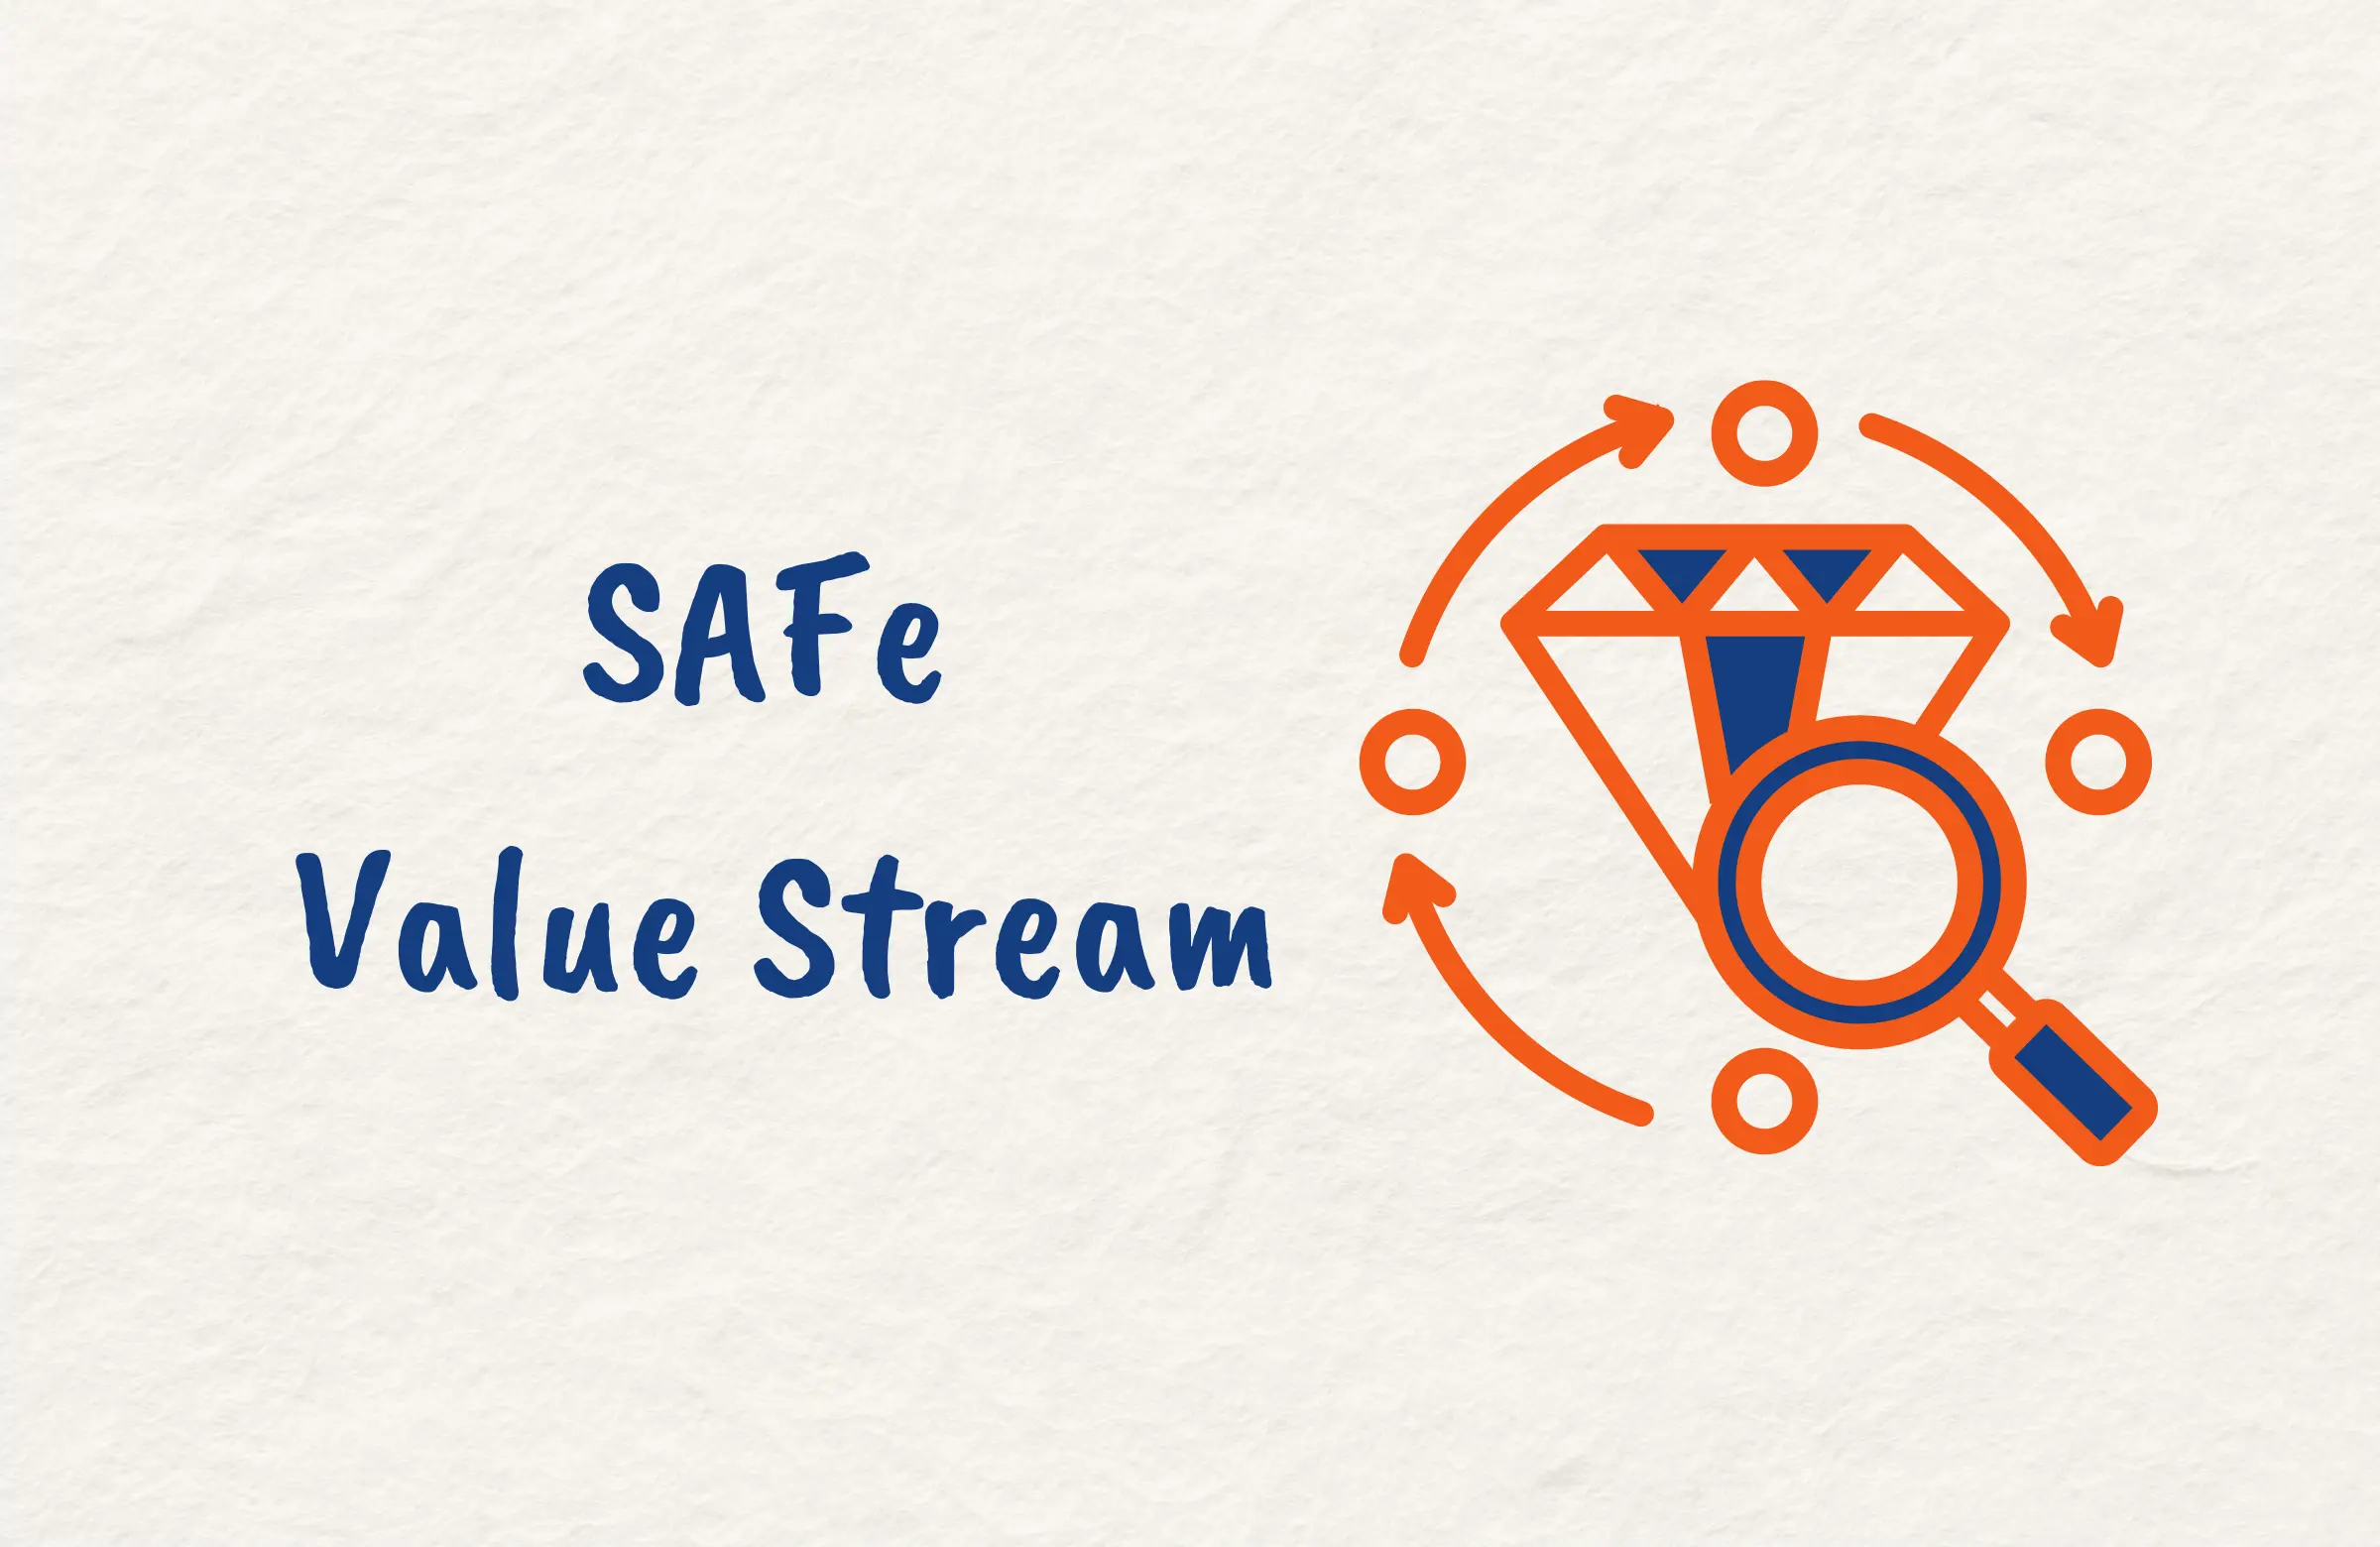 What is a Value Stream in SAFe